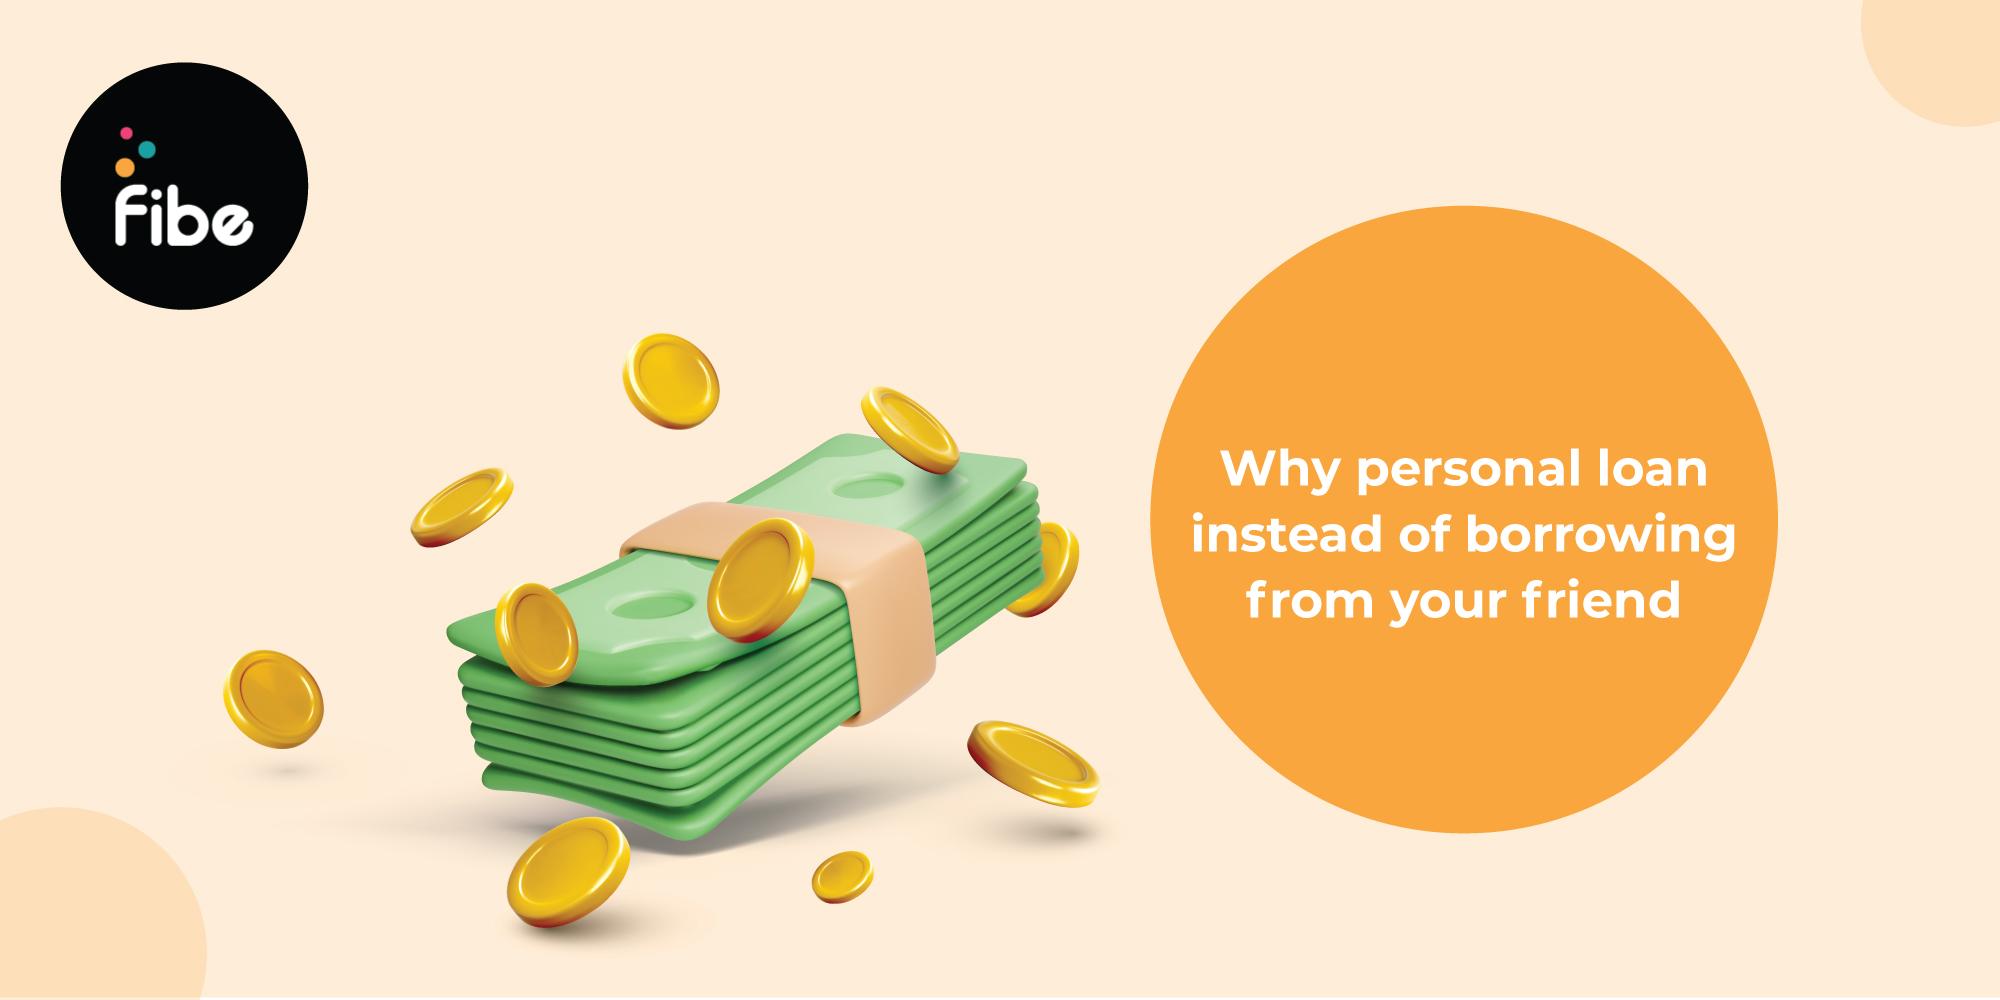 8 Reasons Why a Personal Loan is Better Than Taking a Loan From Friend or Family